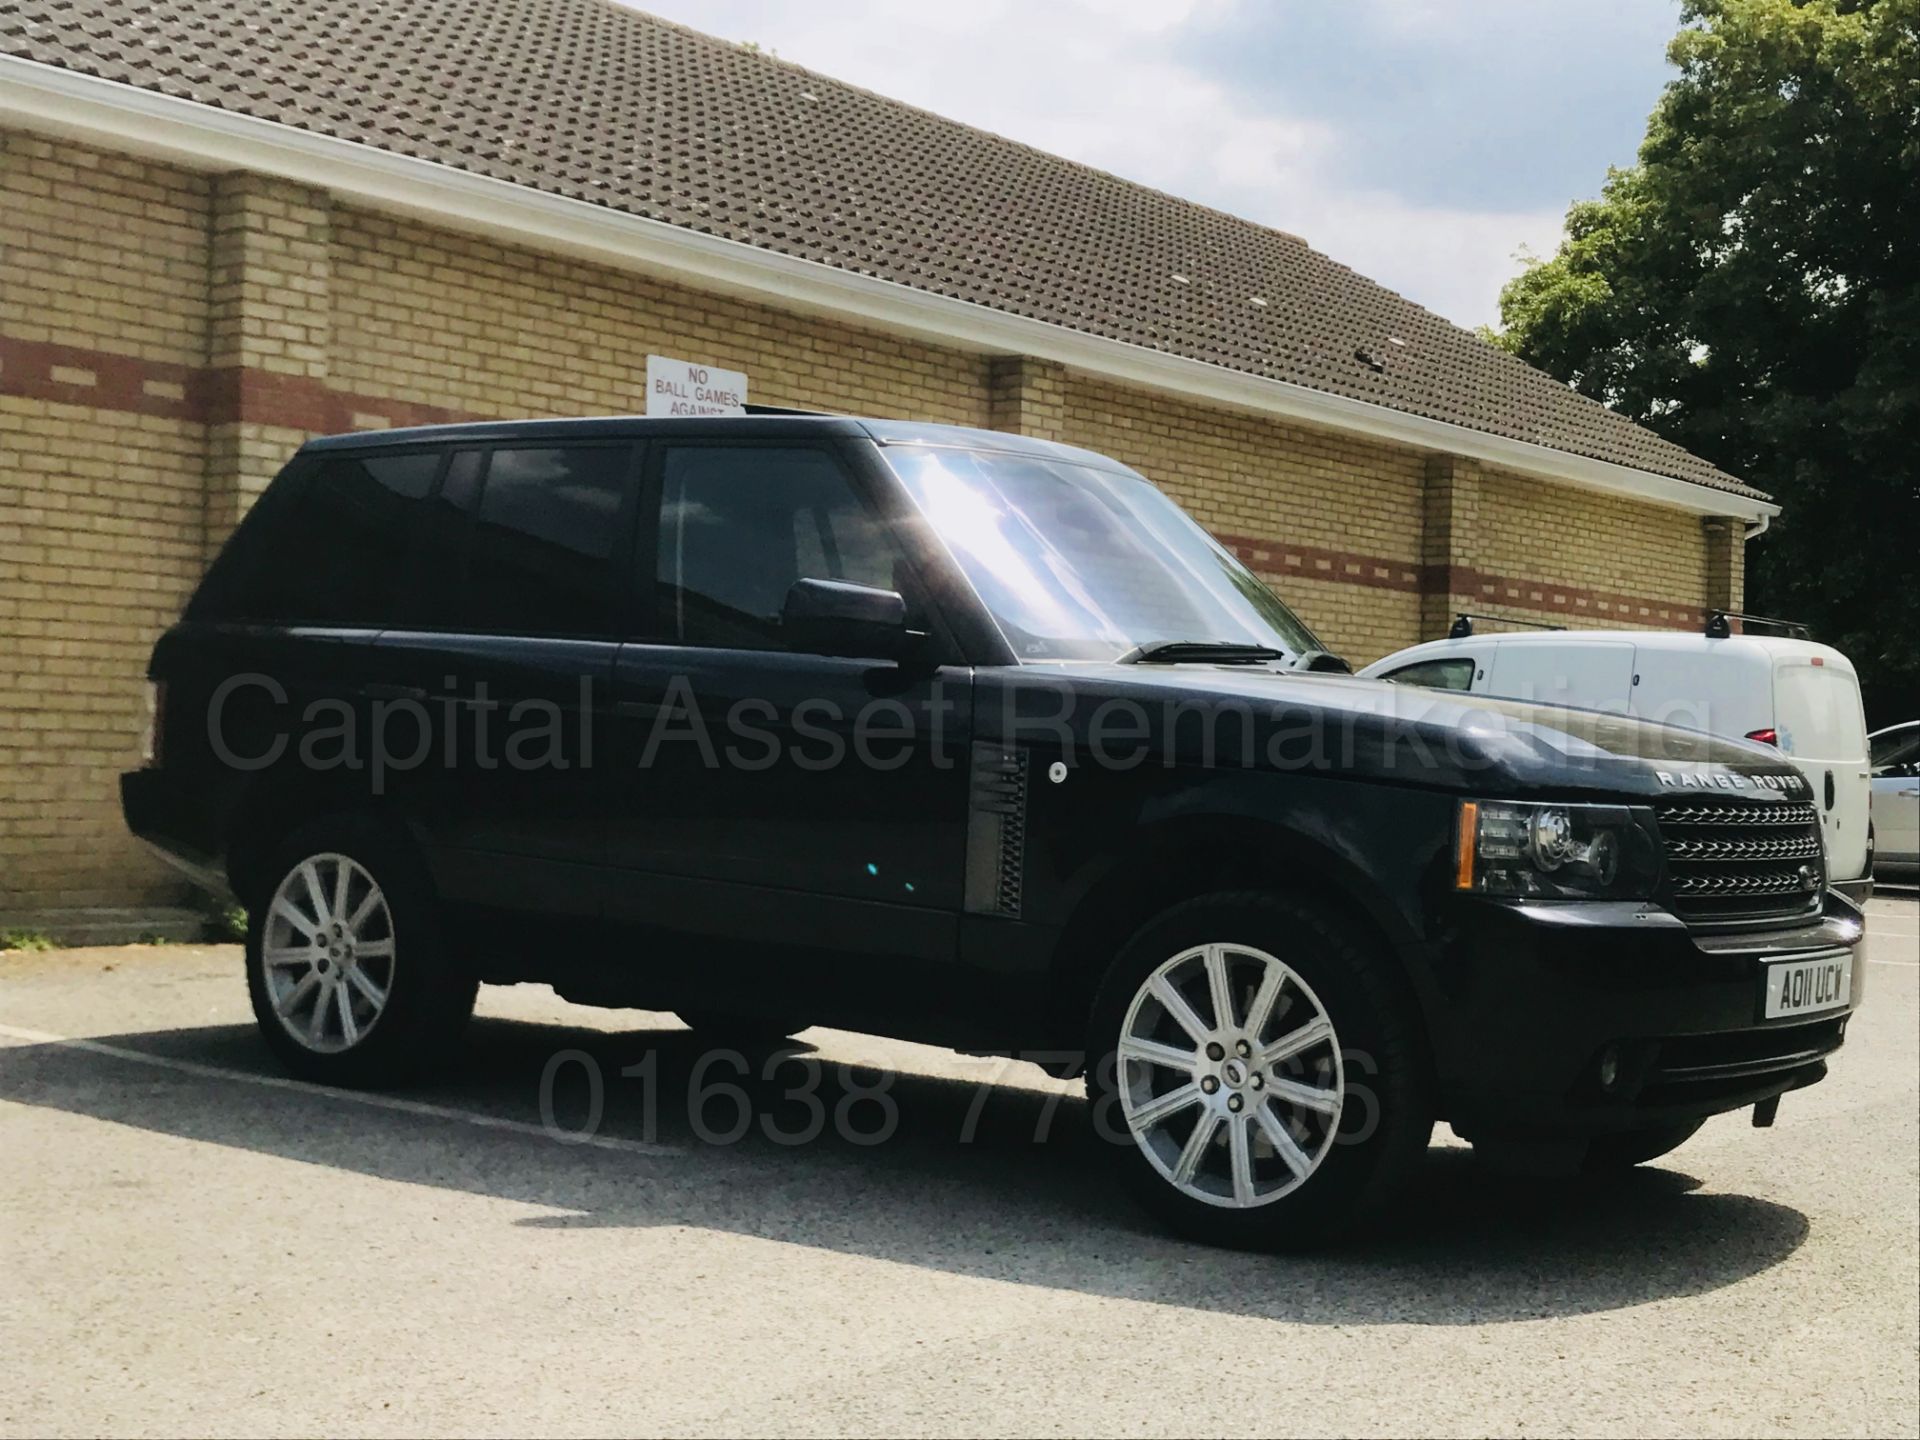 (On Sale) RANGE ROVER VOGUE SE (2011) 'TDV8 -8 SPEED AUTO' **FULLY LOADED** (1 OWNER - FULL HISTORY) - Image 13 of 60